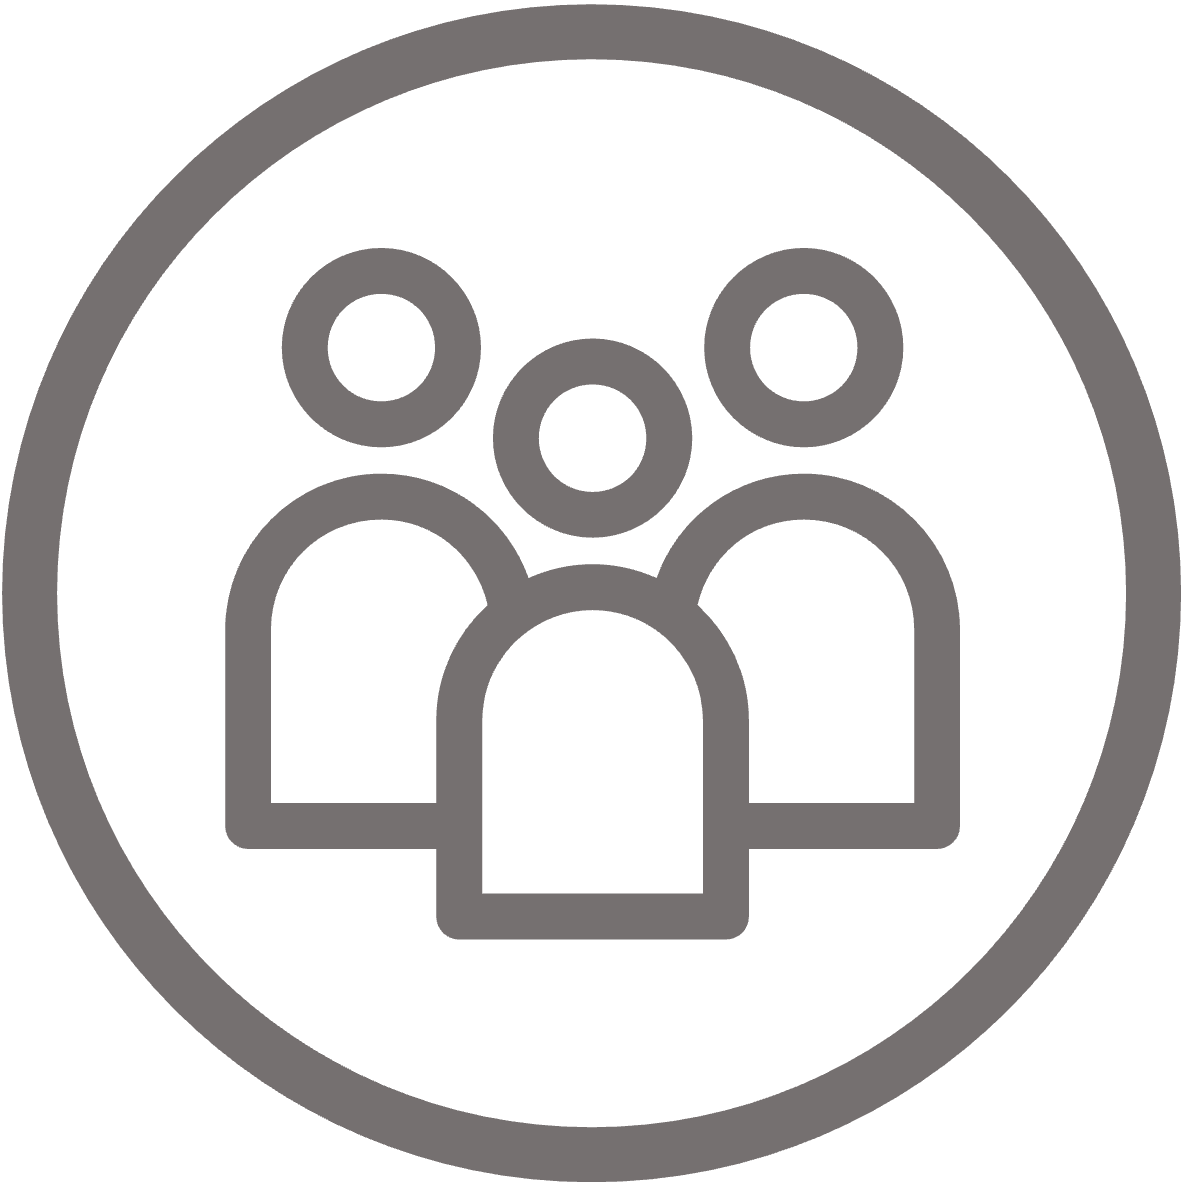 Circular icon of three people with center person lower than other two